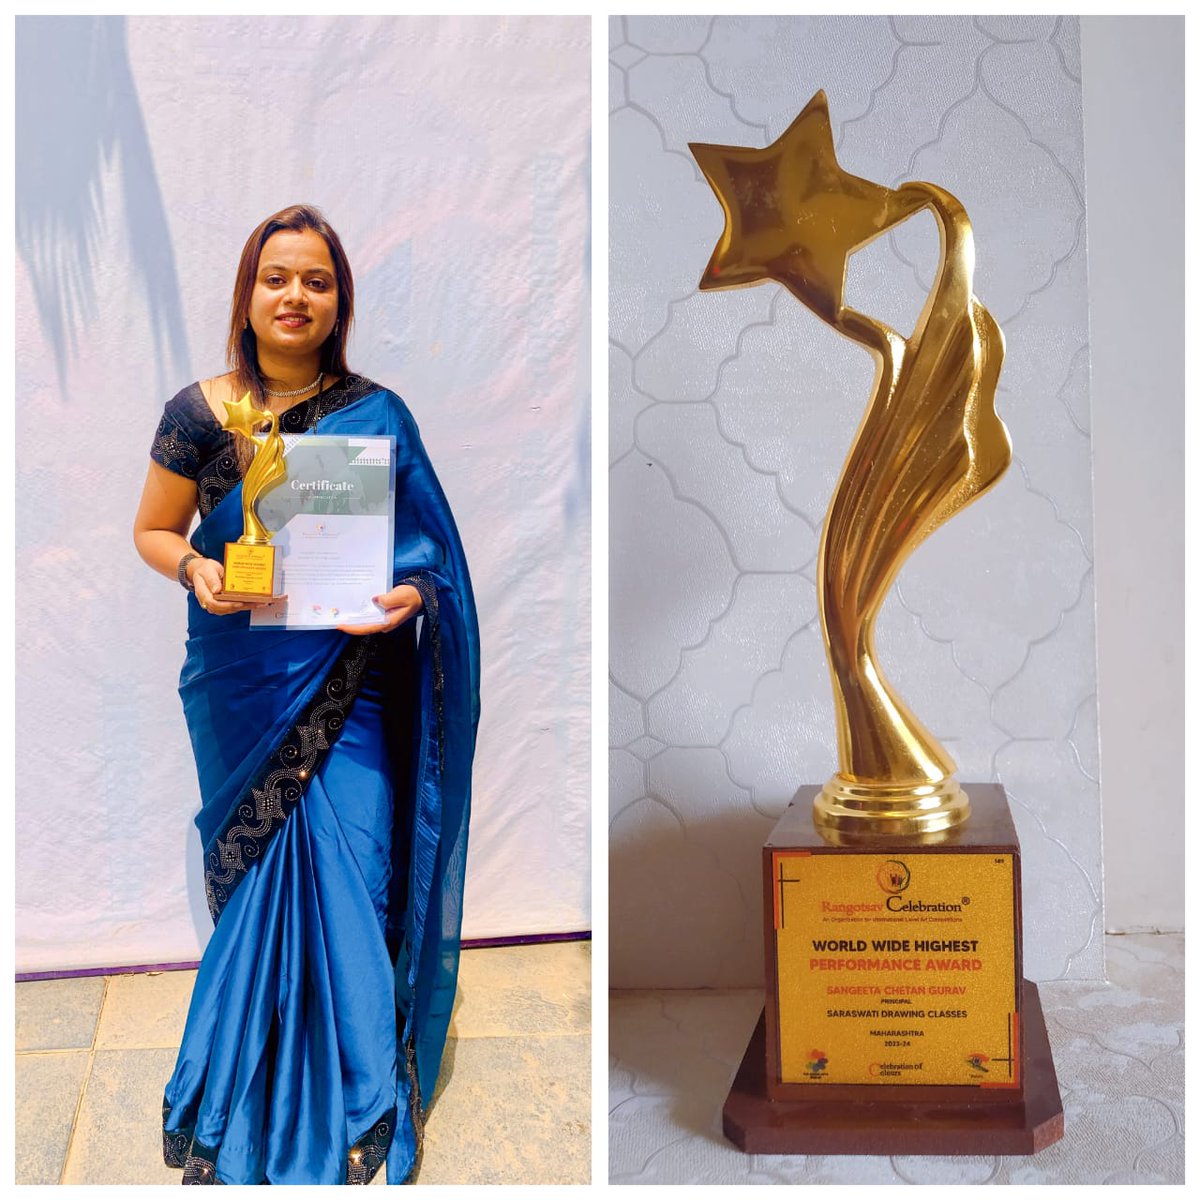 Teachers, students and principal win victorious awards, signifying a shared path of accomplishment, success, and academic brilliance at Saraswati Drawing Classes, Pune - Maharashtra

#students #prizedistributionceremony #celebratingsuccess #pune #schools #trophies…